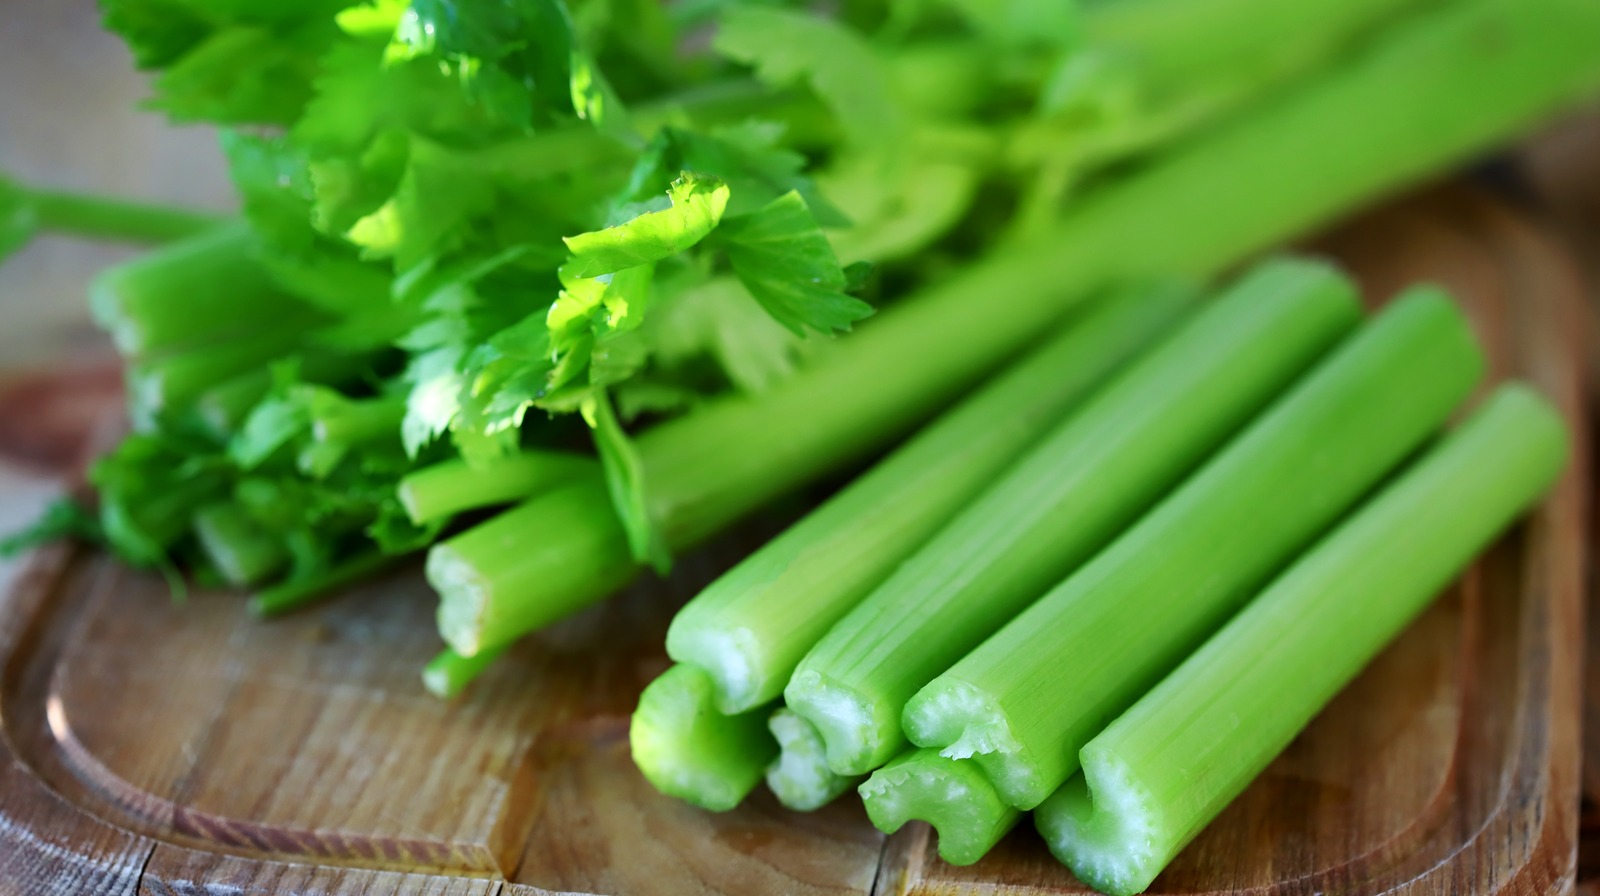 celery stick coloring page